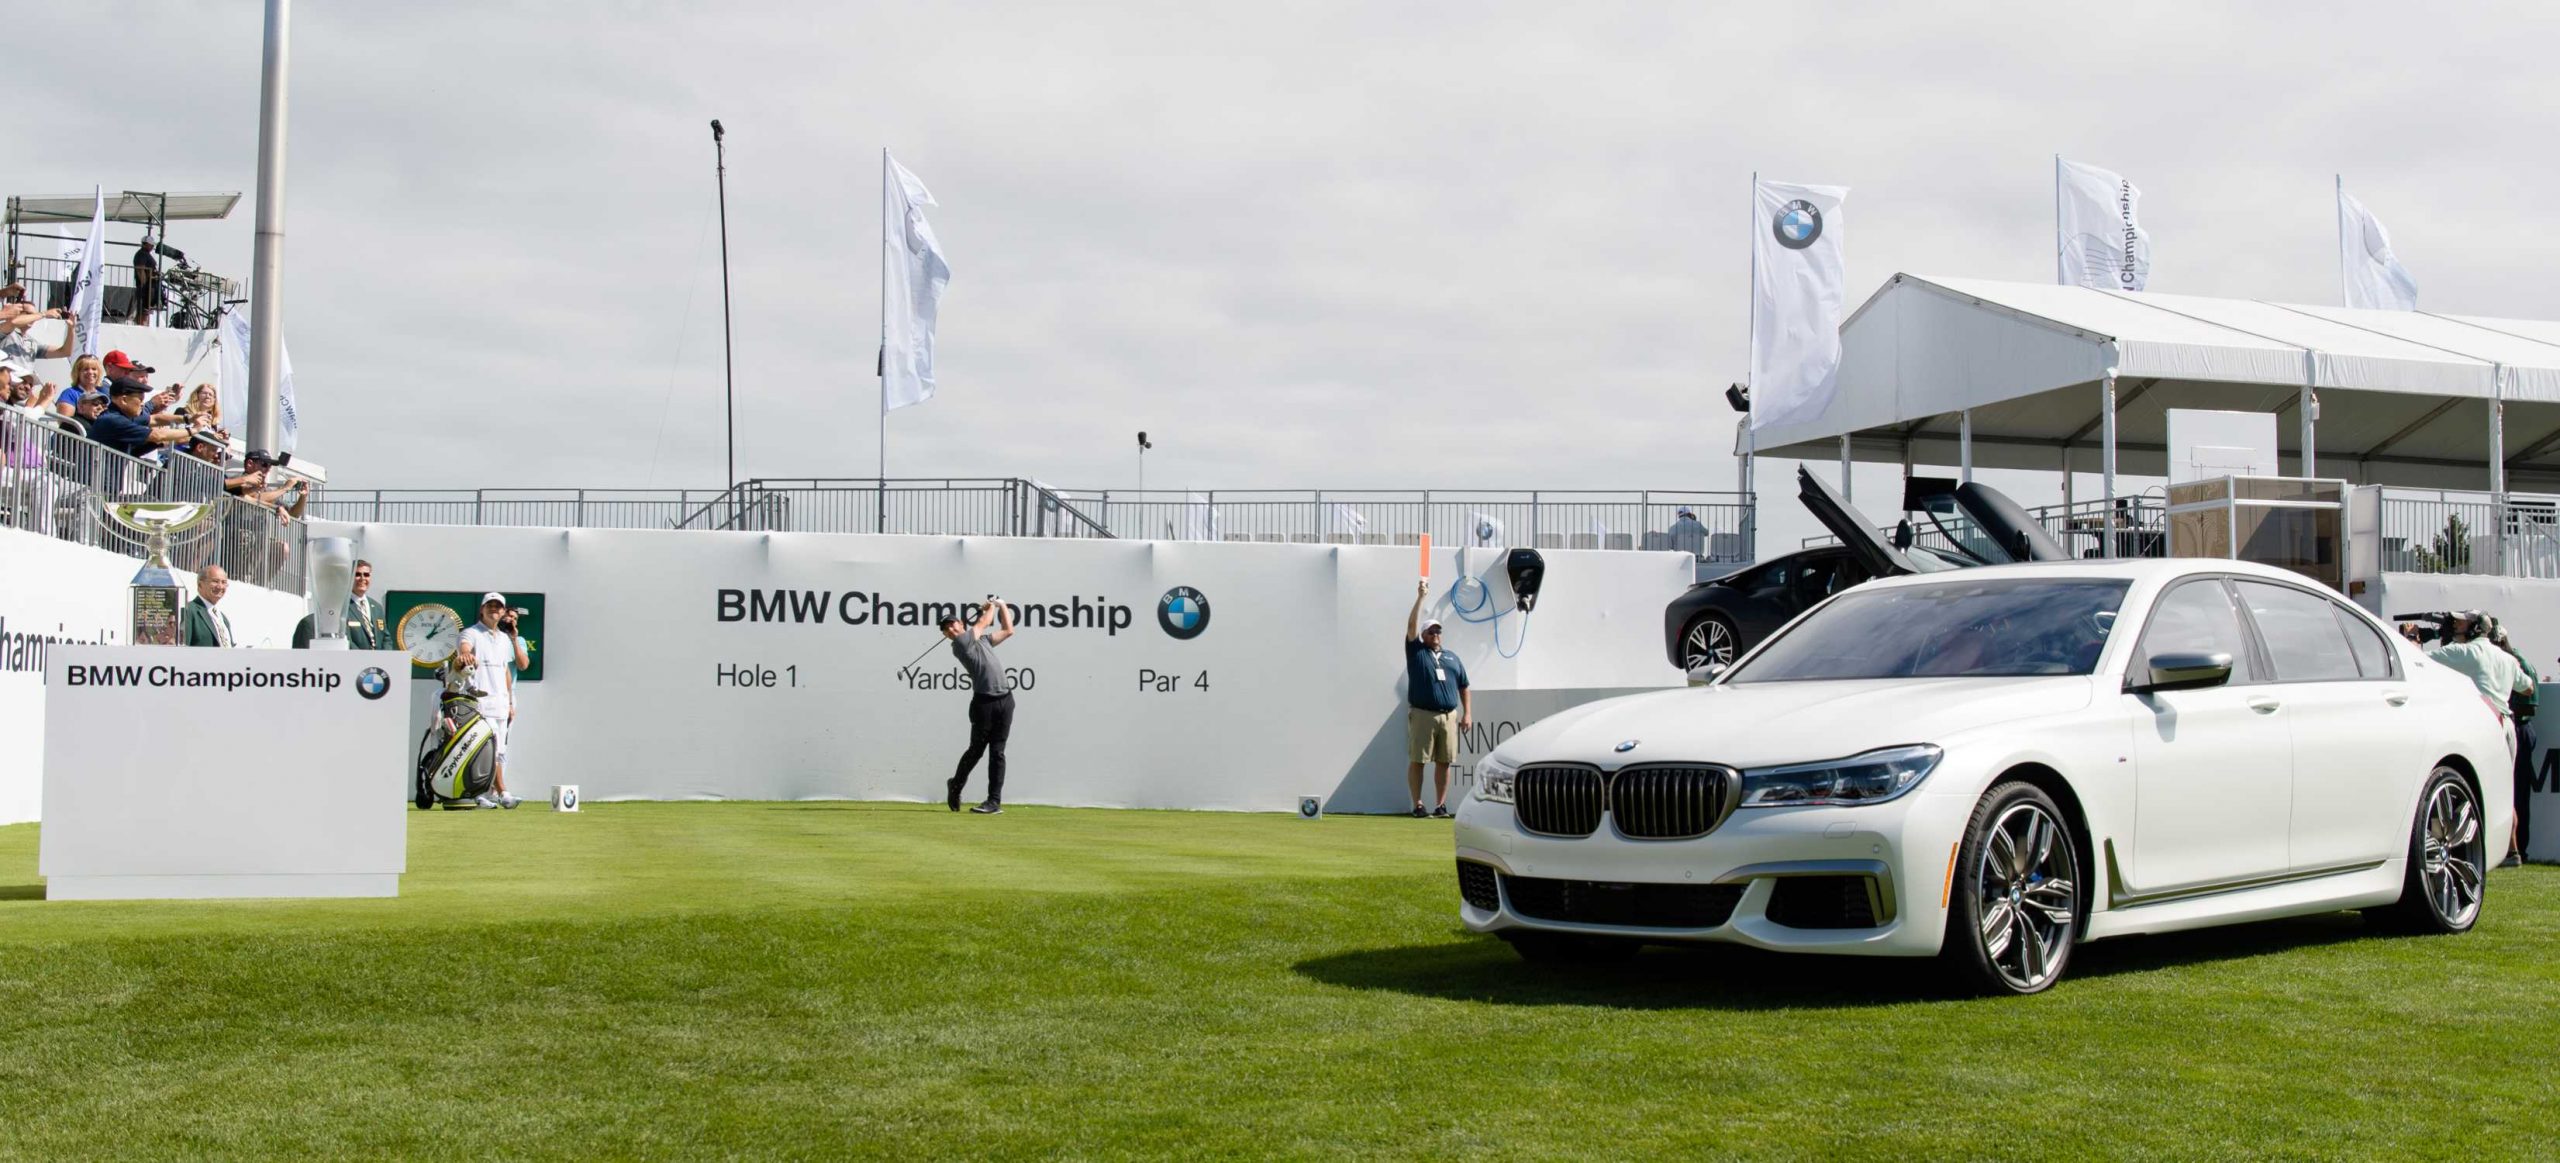 P90276691-pga-tour-pro-rory-mcilroy-opened-the-2017-bmw-championship-by-teeing-off-over-the-bmw-championship-e-3302px